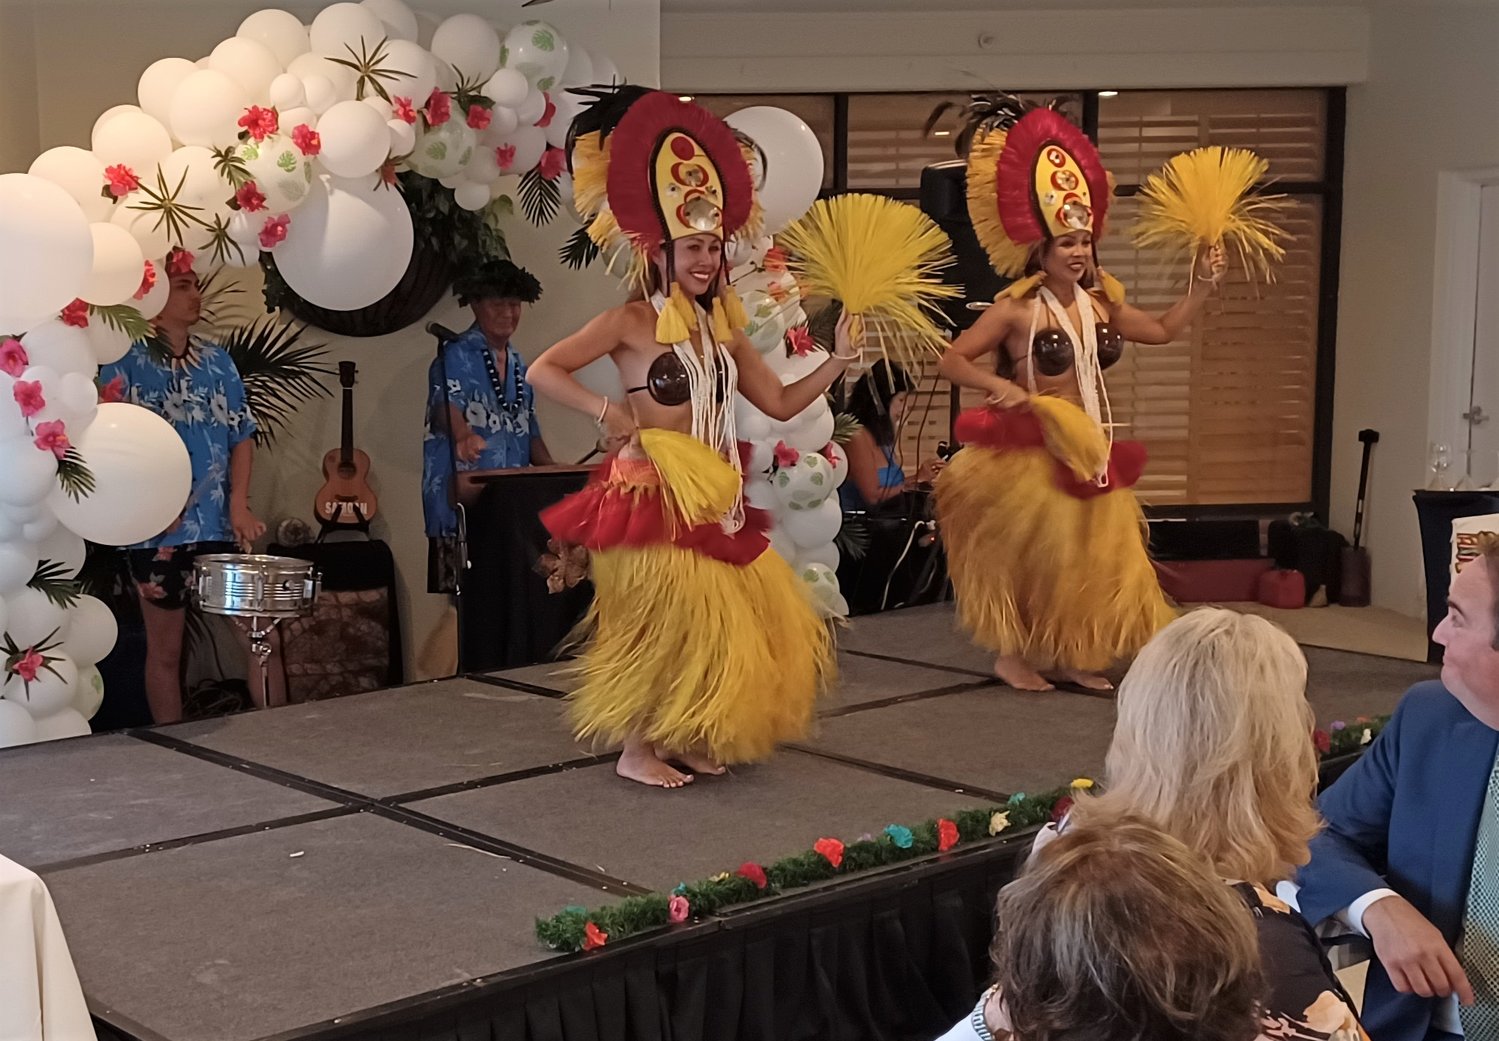 Entertainment was provided by Prince Pele’s Polynesian Revue.